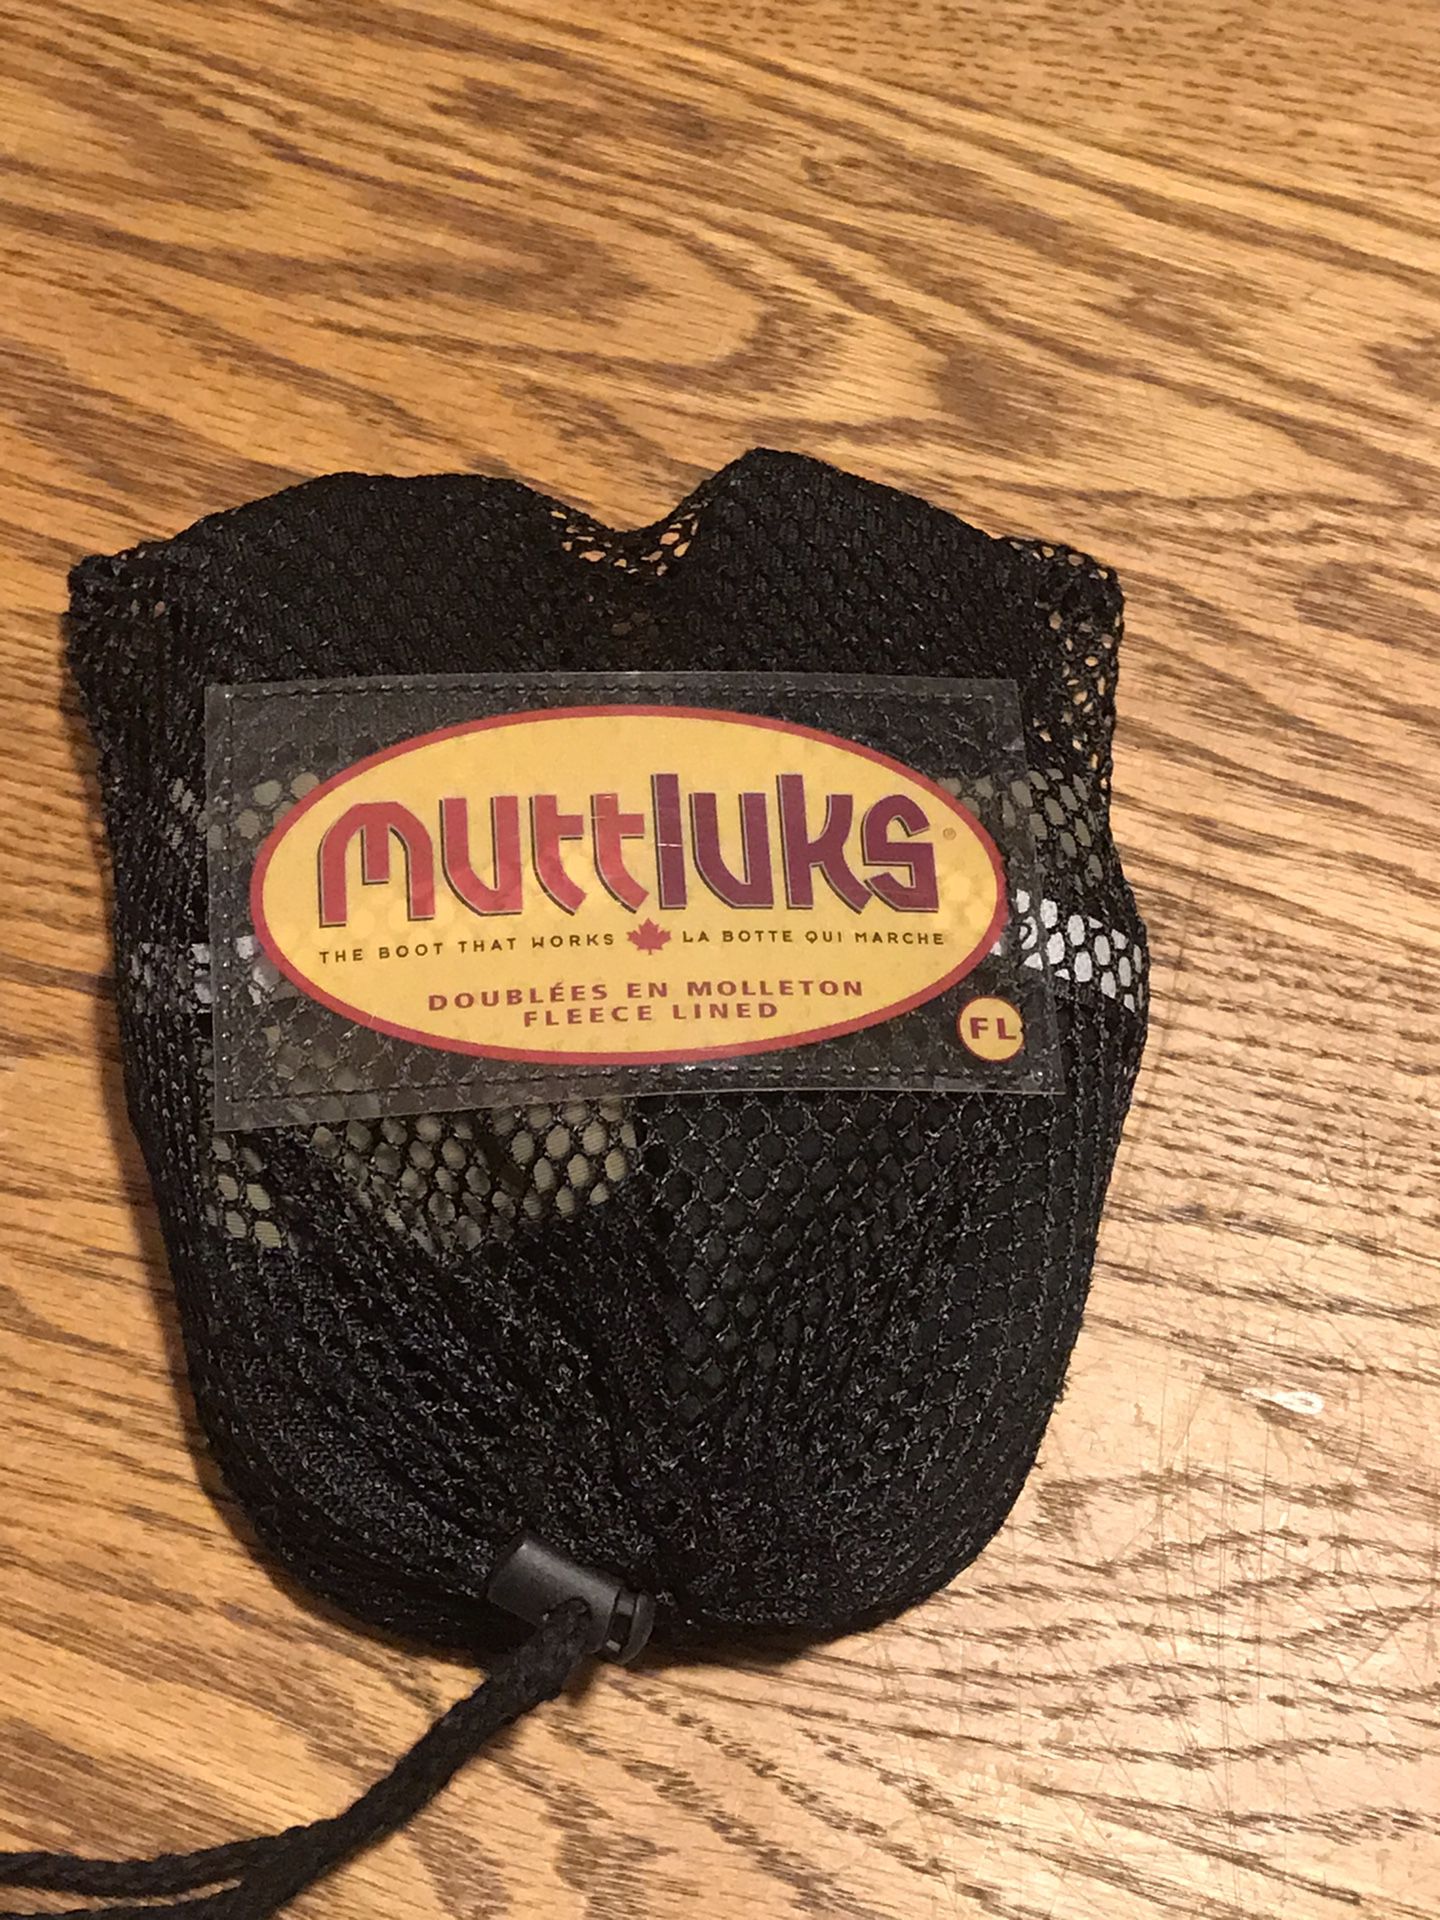 NWT Muttluks dog paw protector boots size small